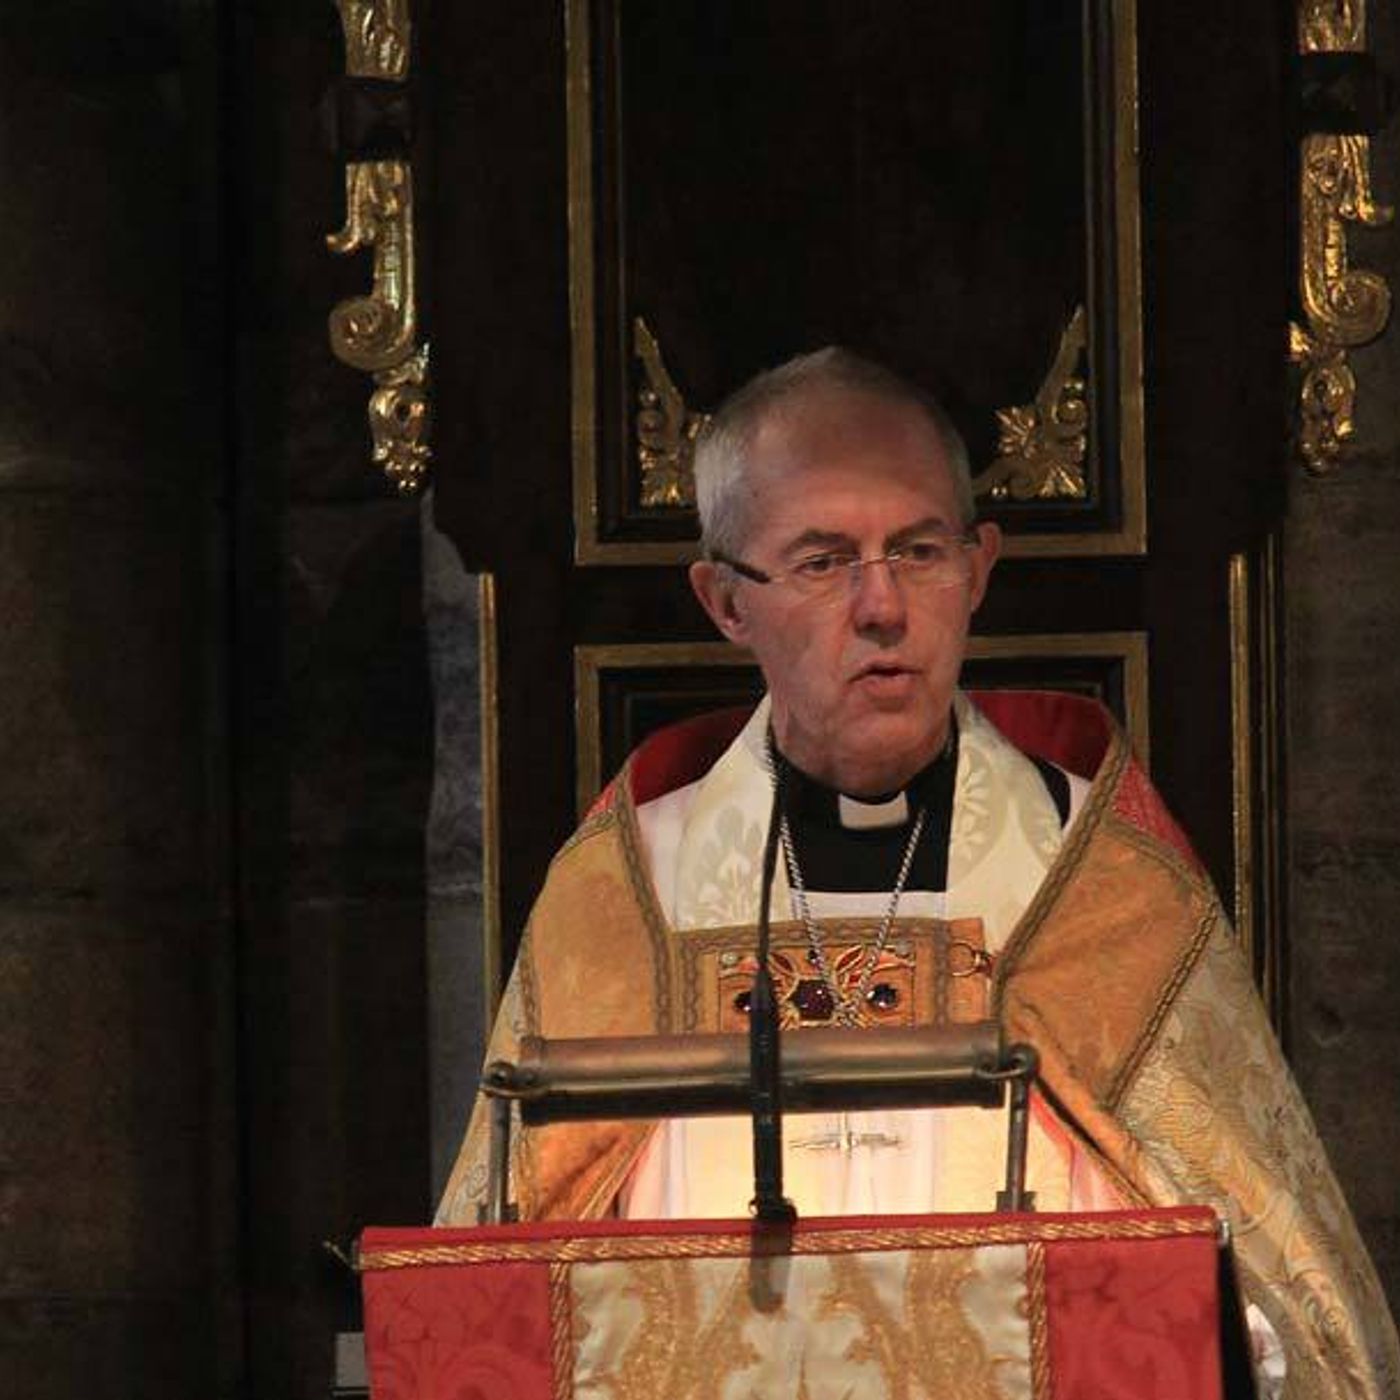 Sermon given by the Archbishop of Canterbury